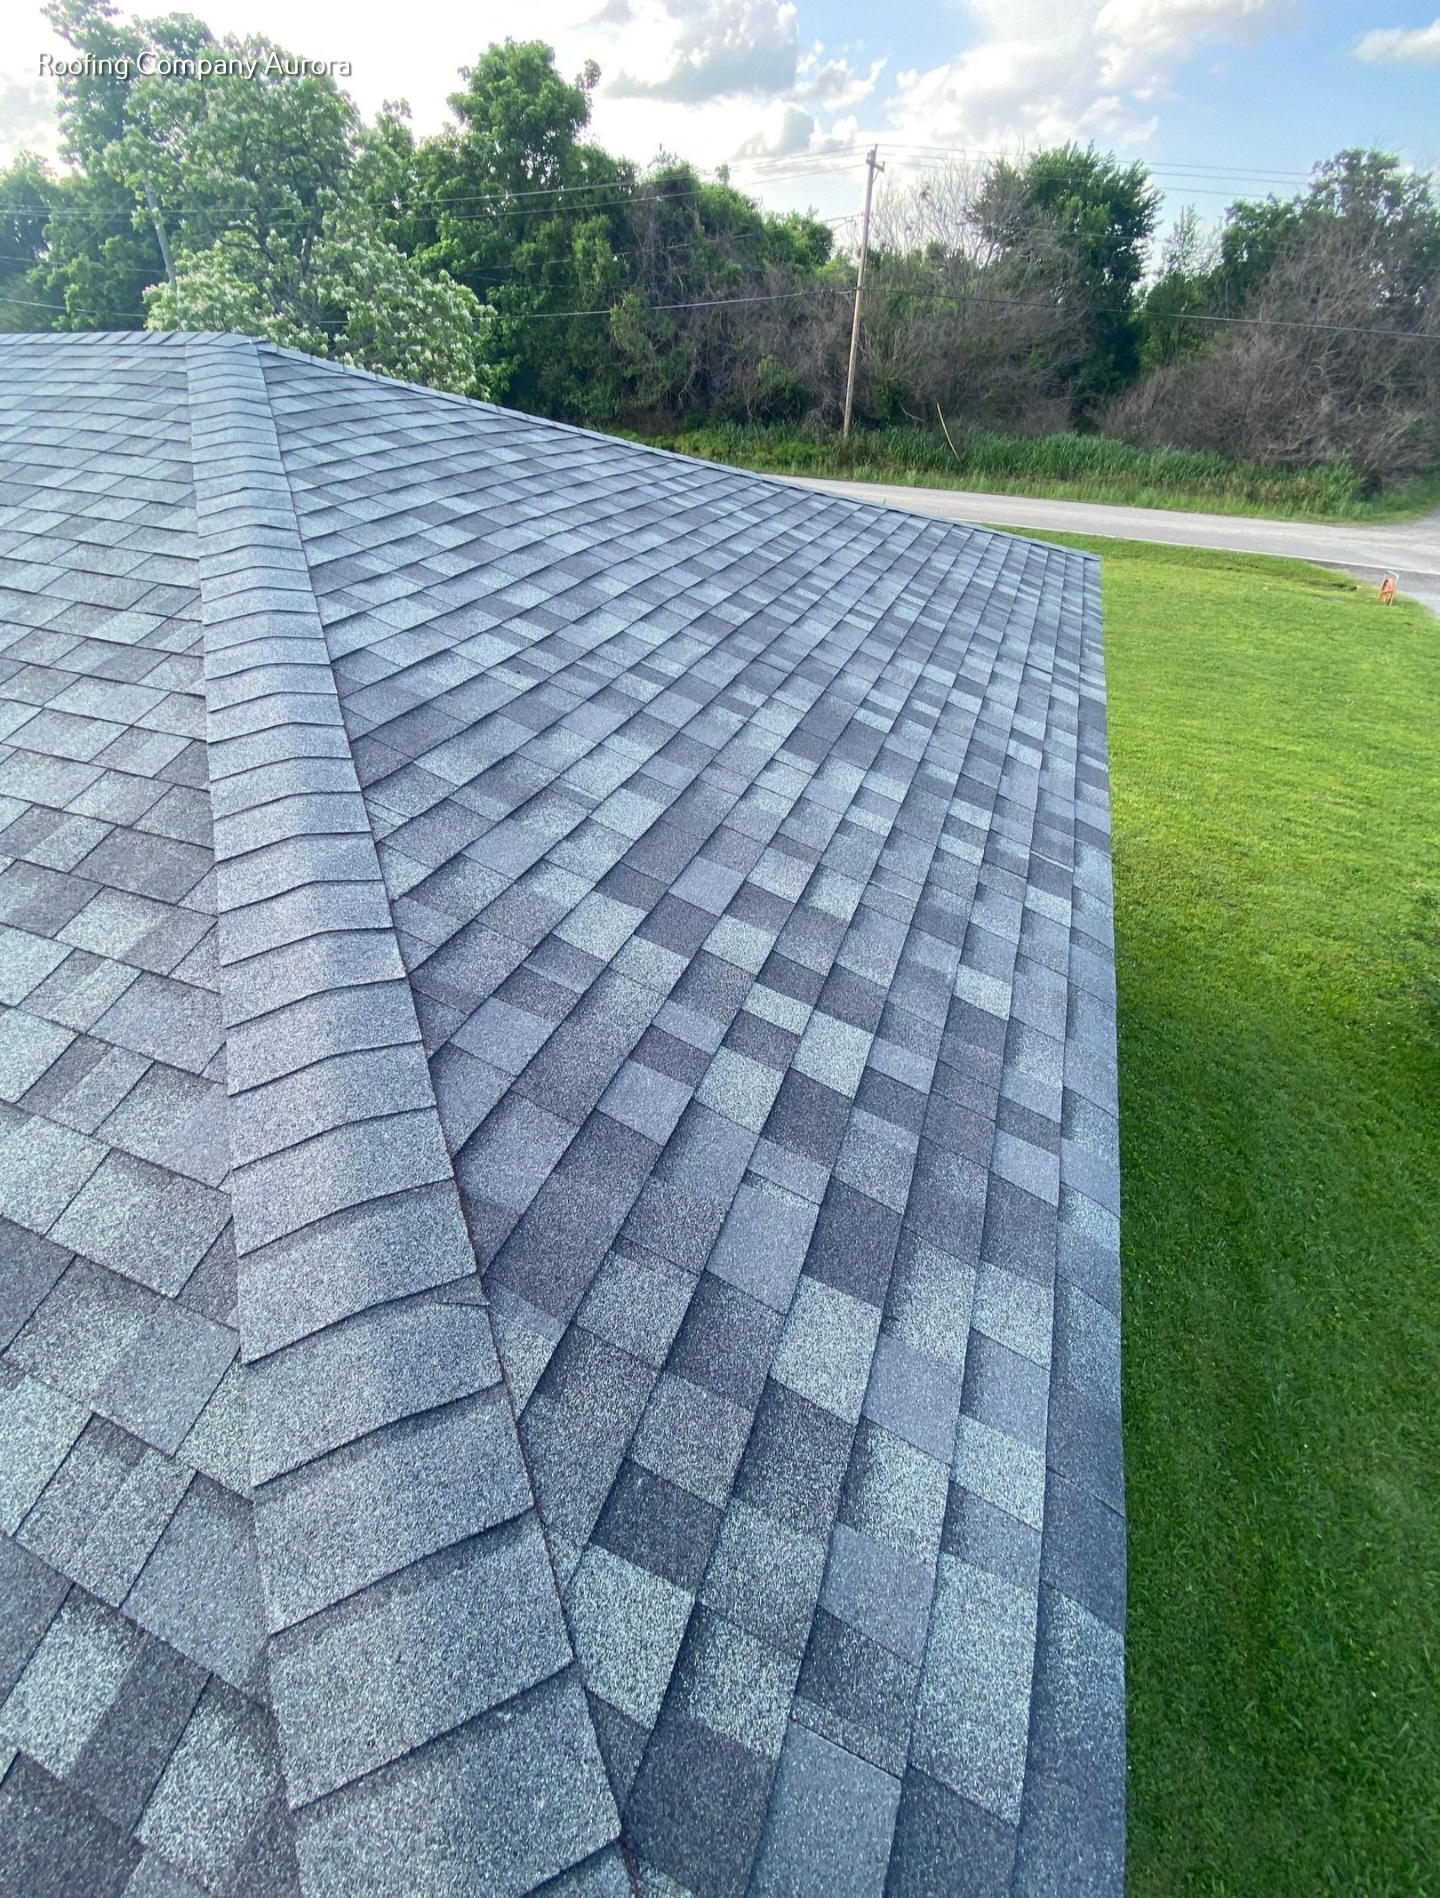 1st Priority Roofing Informs the Public About Their Services 